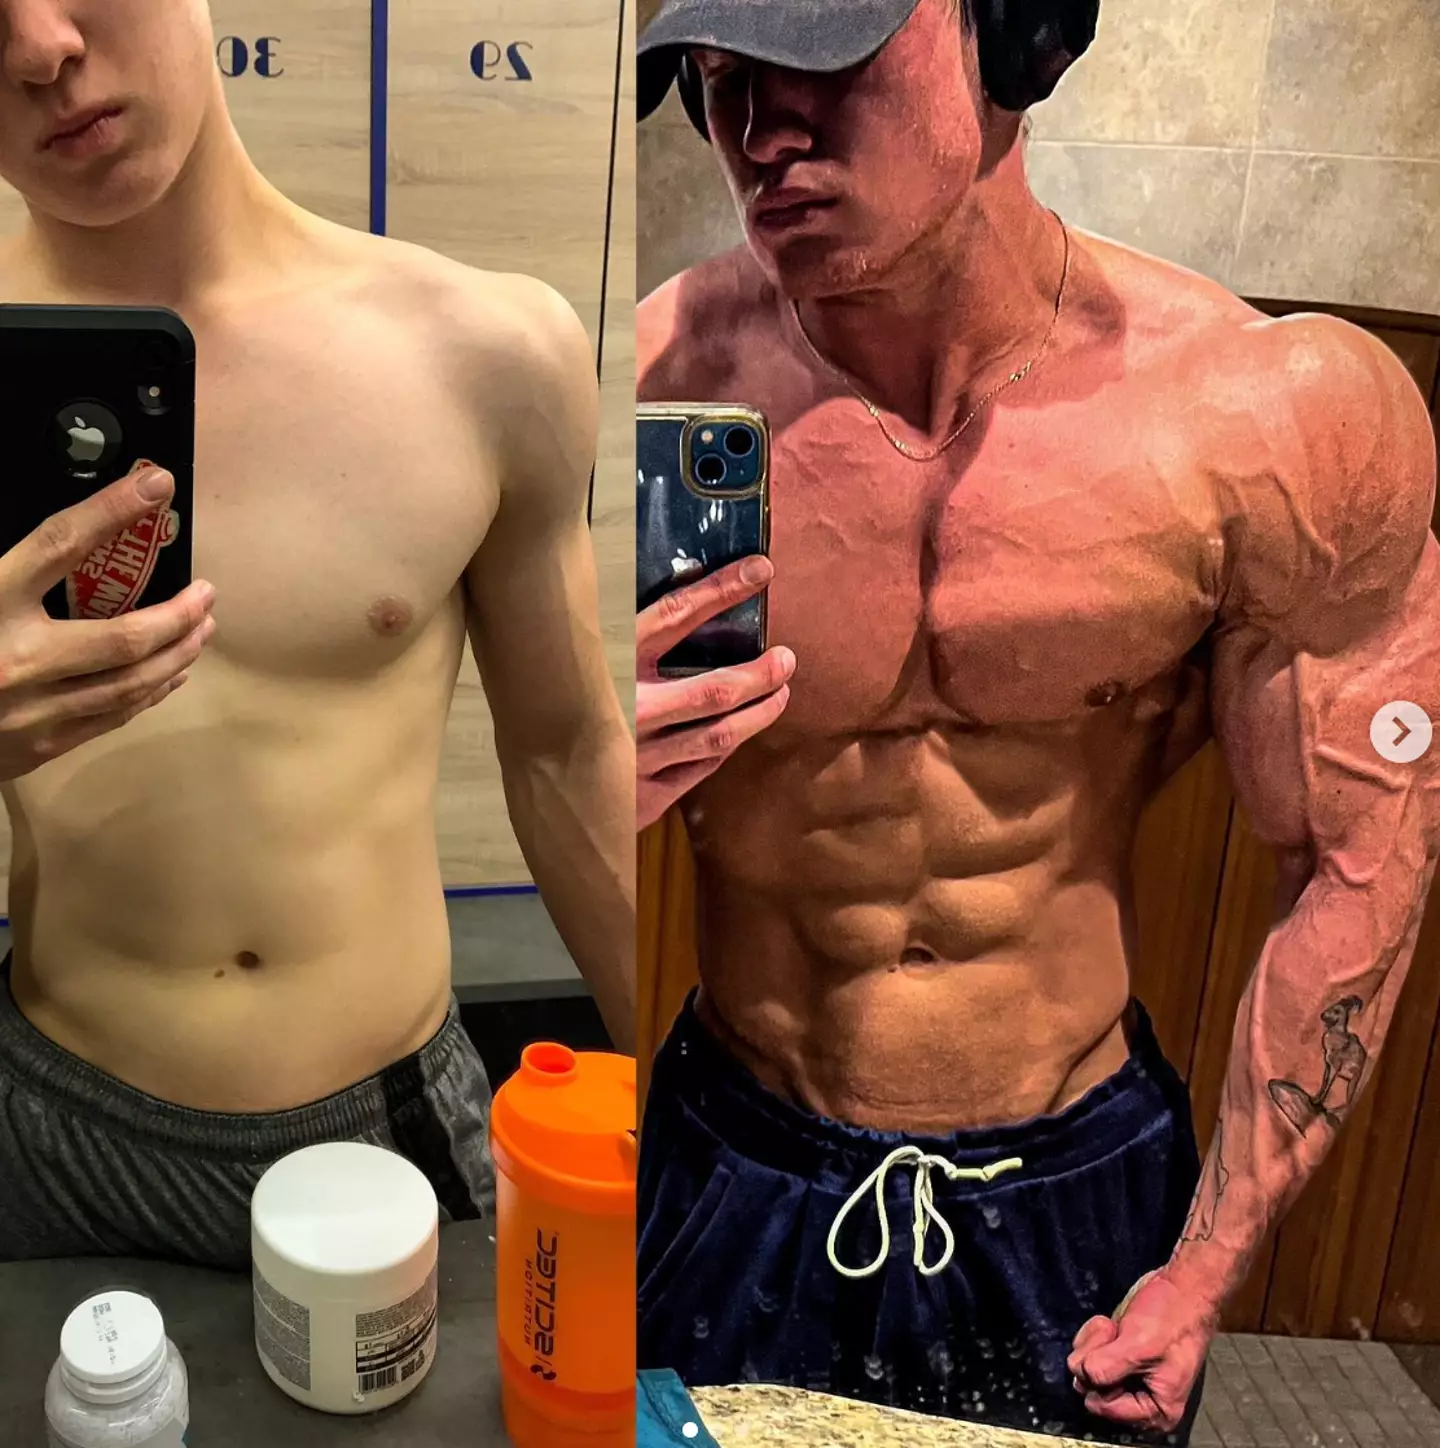 Anton Ratushnyi showed off his incredible transformation in a post earlier this year.